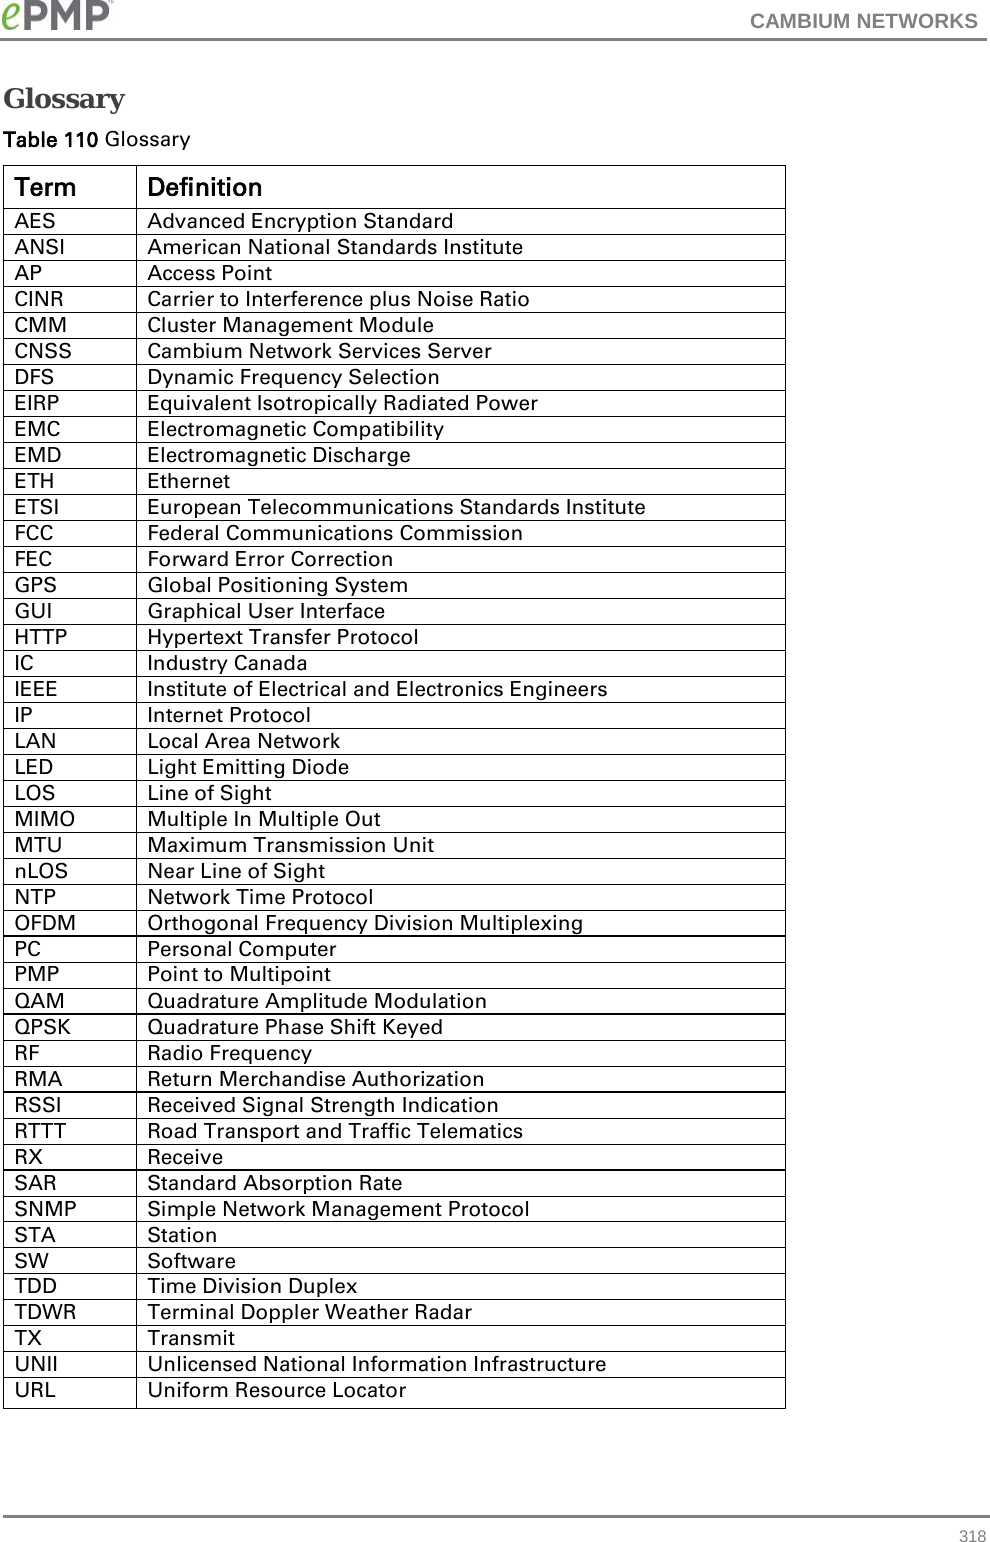 CAMBIUM NETWORKS  Glossary Table 110 Glossary Term Definition AES Advanced Encryption Standard ANSI American National Standards Institute AP Access Point CINR Carrier to Interference plus Noise Ratio CMM Cluster Management Module CNSS Cambium Network Services Server DFS Dynamic Frequency Selection EIRP Equivalent Isotropically Radiated Power EMC Electromagnetic Compatibility EMD Electromagnetic Discharge ETH Ethernet ETSI European Telecommunications Standards Institute FCC Federal Communications Commission FEC Forward Error Correction GPS Global Positioning System GUI Graphical User Interface HTTP Hypertext Transfer Protocol IC Industry Canada IEEE Institute of Electrical and Electronics Engineers IP Internet Protocol LAN Local Area Network LED Light Emitting Diode LOS Line of Sight MIMO Multiple In Multiple Out MTU Maximum Transmission Unit nLOS Near Line of Sight NTP Network Time Protocol OFDM Orthogonal Frequency Division Multiplexing PC Personal Computer PMP Point to Multipoint QAM Quadrature Amplitude Modulation QPSK Quadrature Phase Shift Keyed RF Radio Frequency RMA Return Merchandise Authorization RSSI Received Signal Strength Indication RTTT Road Transport and Traffic Telematics RX Receive SAR Standard Absorption Rate SNMP Simple Network Management Protocol STA Station SW Software TDD Time Division Duplex TDWR Terminal Doppler Weather Radar TX Transmit UNII Unlicensed National Information Infrastructure URL Uniform Resource Locator   318 